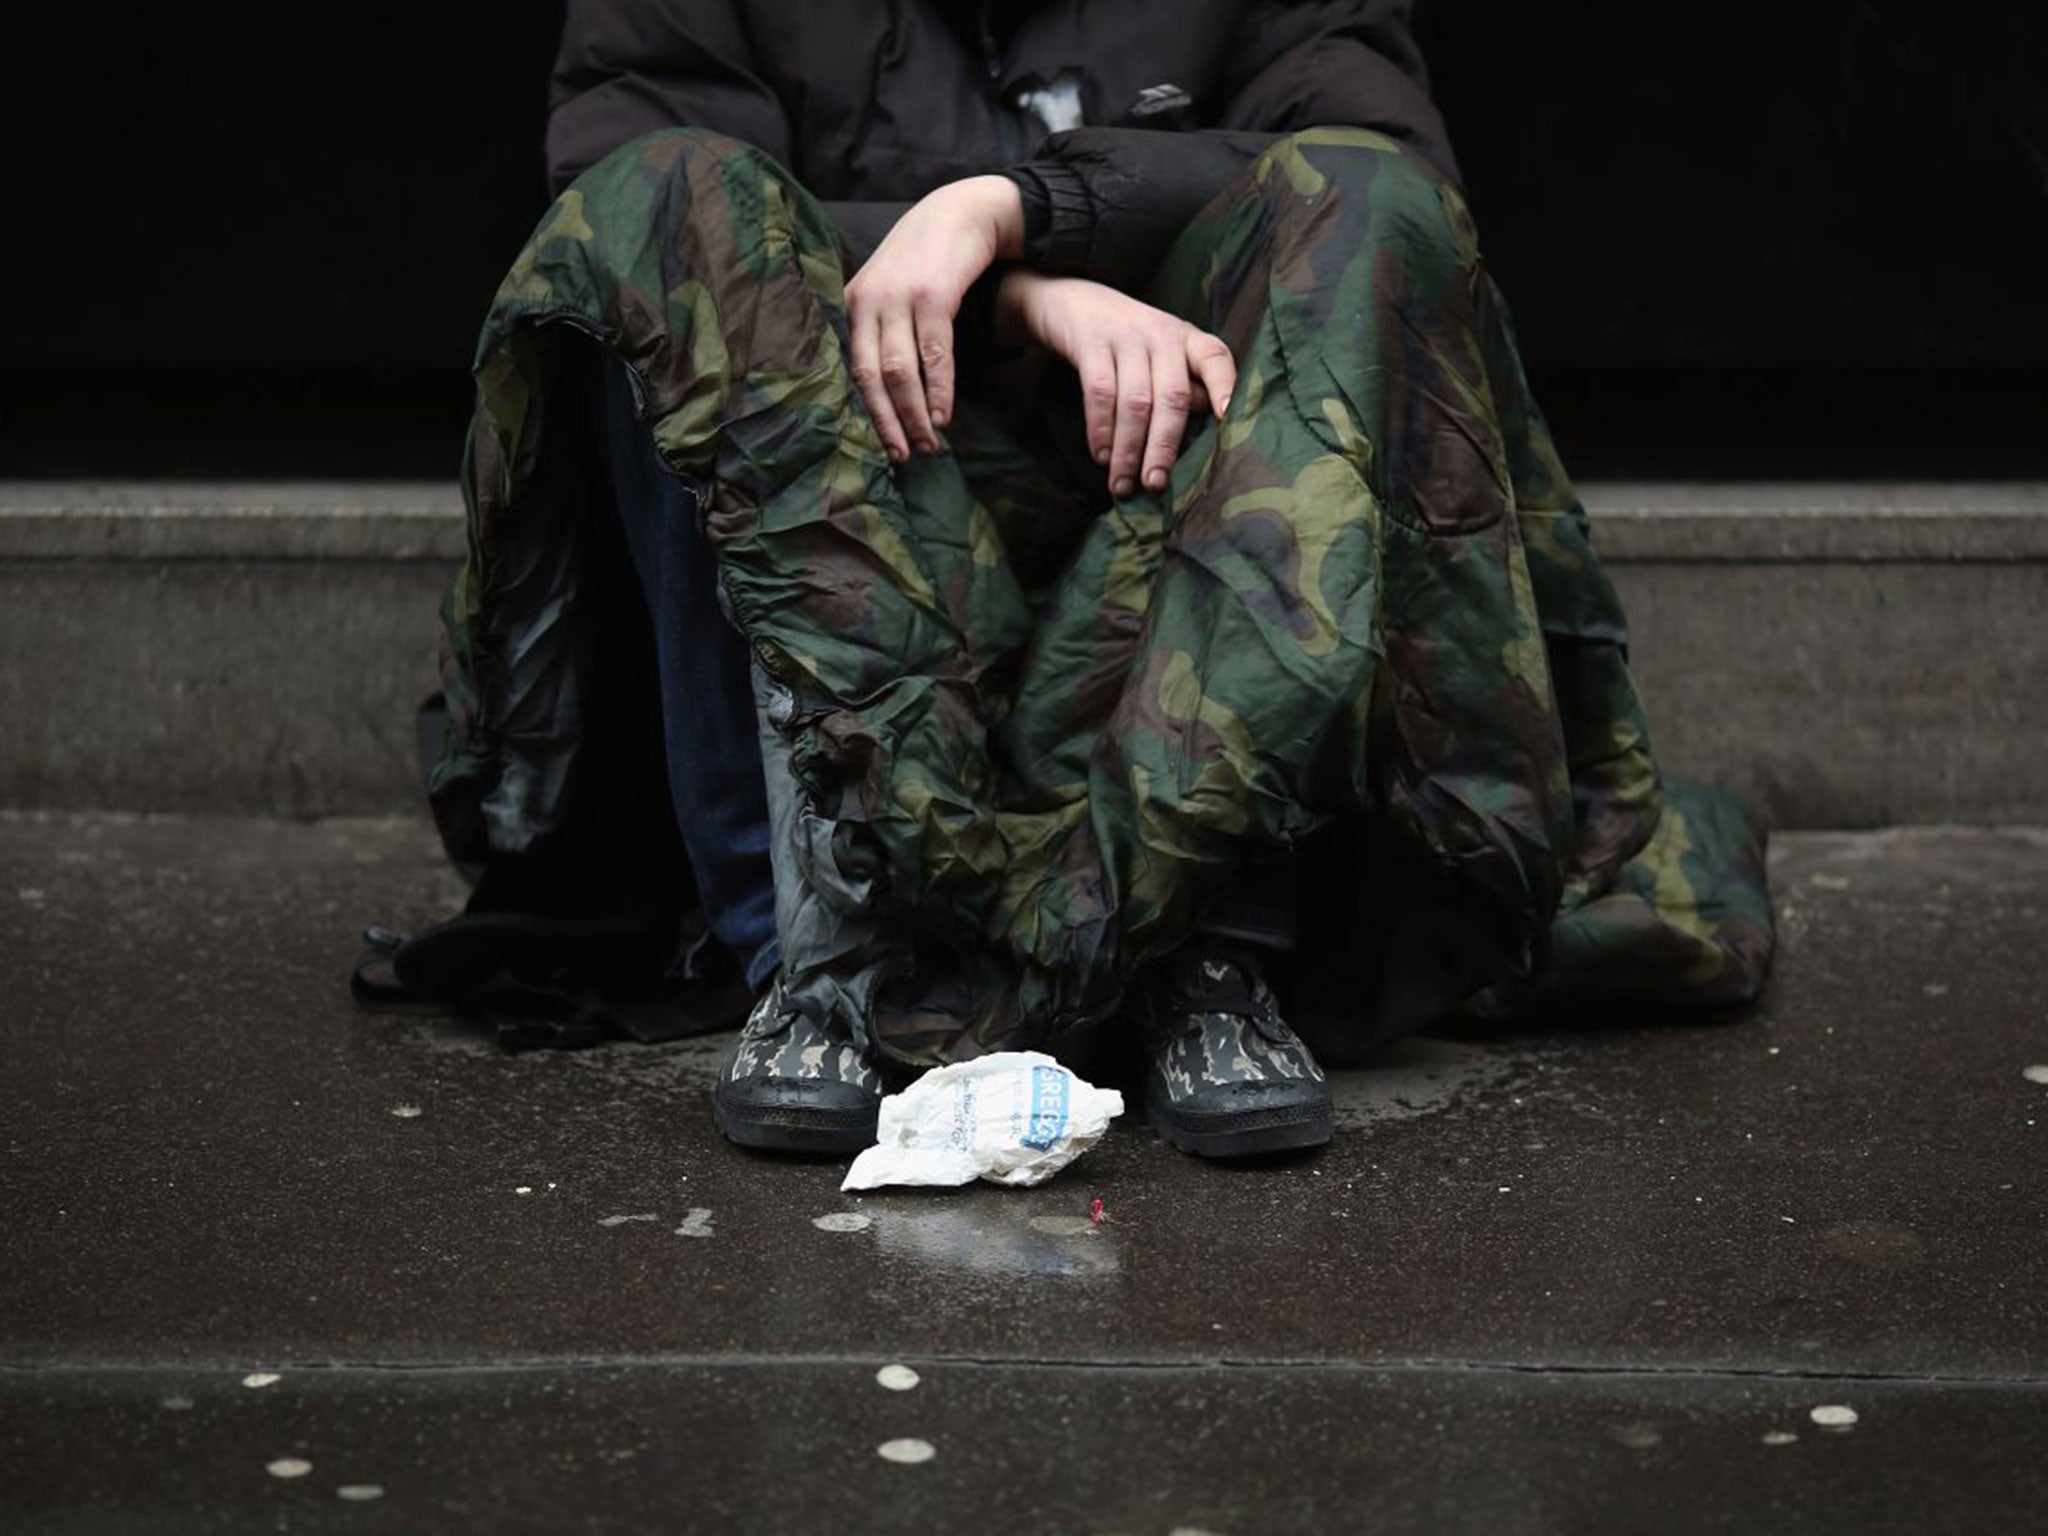 Rough sleepers are defined as anyone found either sleeping or about to bed down in the open air, or in a building not designed for habitation